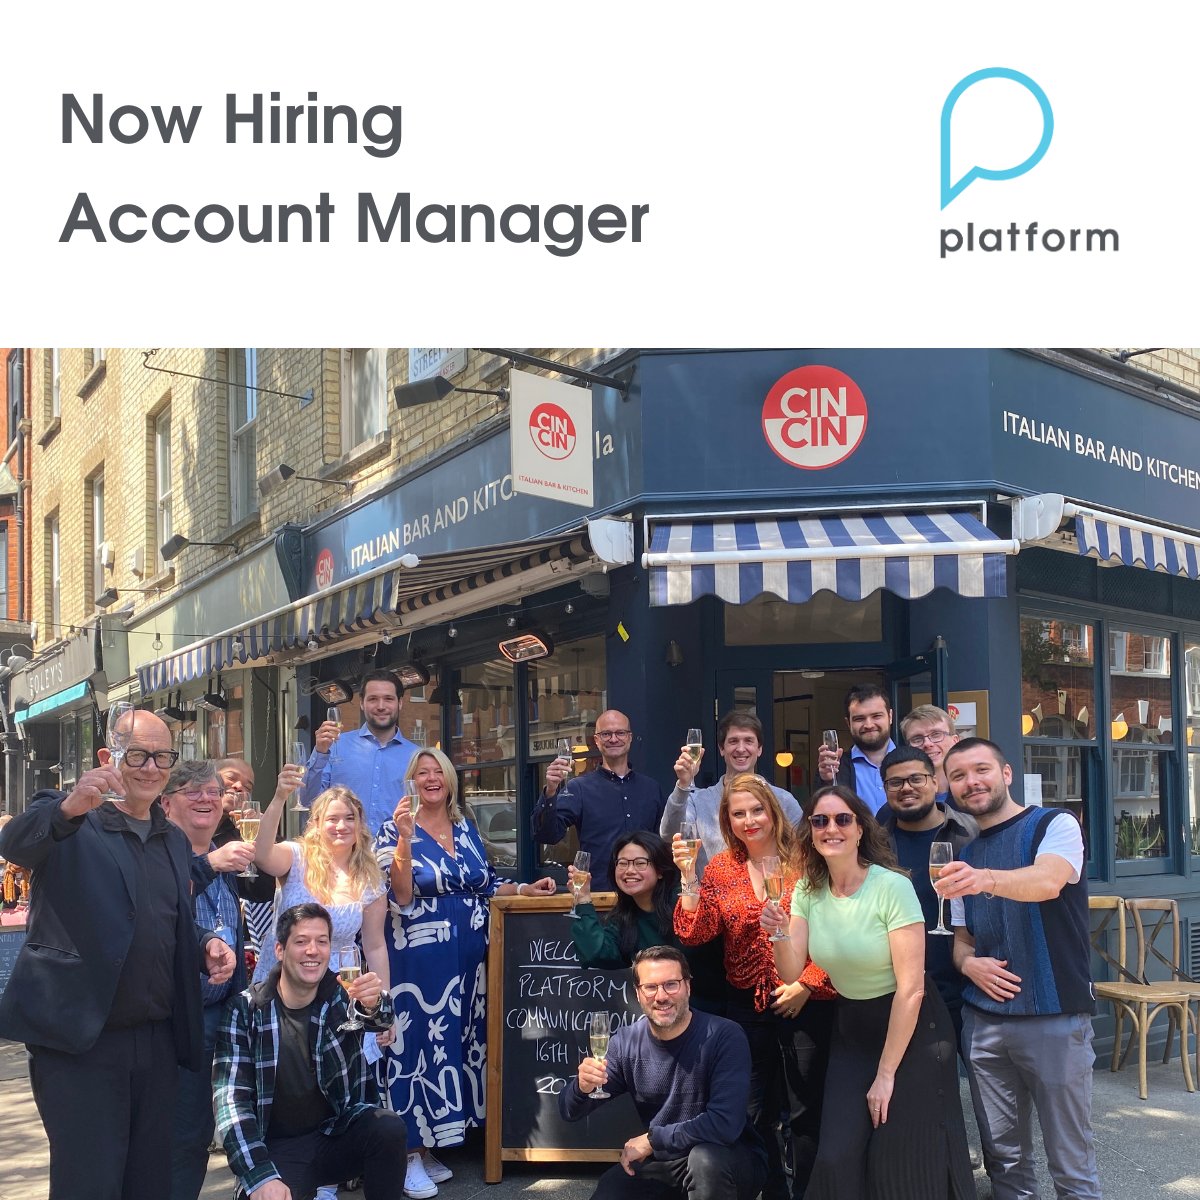 The Platform team is growing again! So, if you’re an established SAE or an AM looking to take the next step in your B2B tech PR & comms career, we would love to hear from you! Full job description and application details here:
platformcomms.com/now-hiring-acc…

#Hiring #PRJobs #jobalert